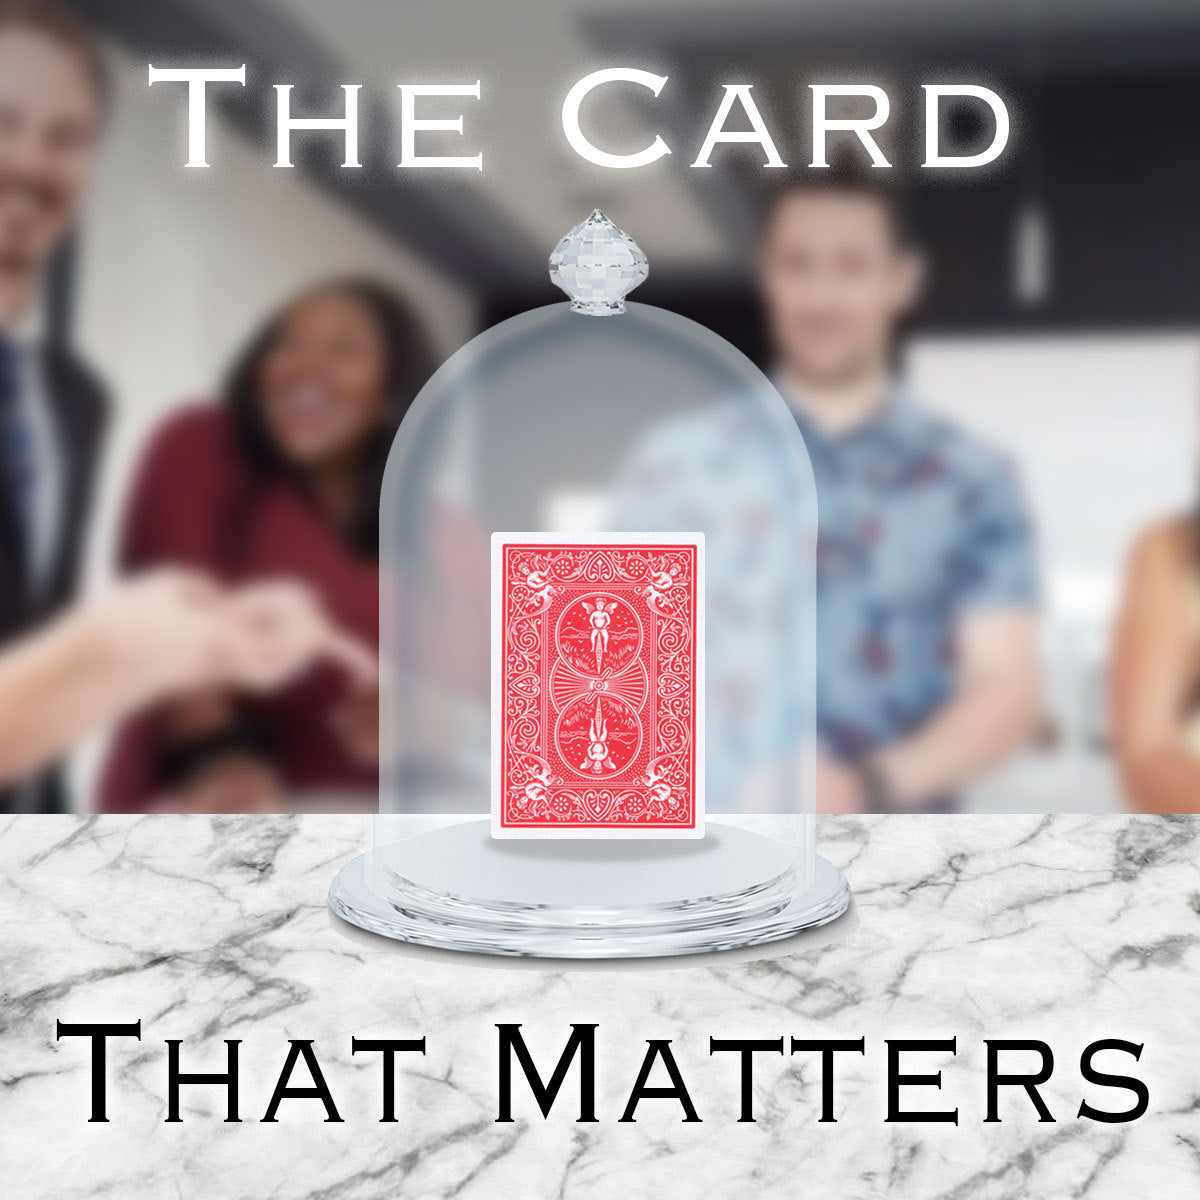 The Card That Matters by Rick Lax - Available at pipermagic.com.au